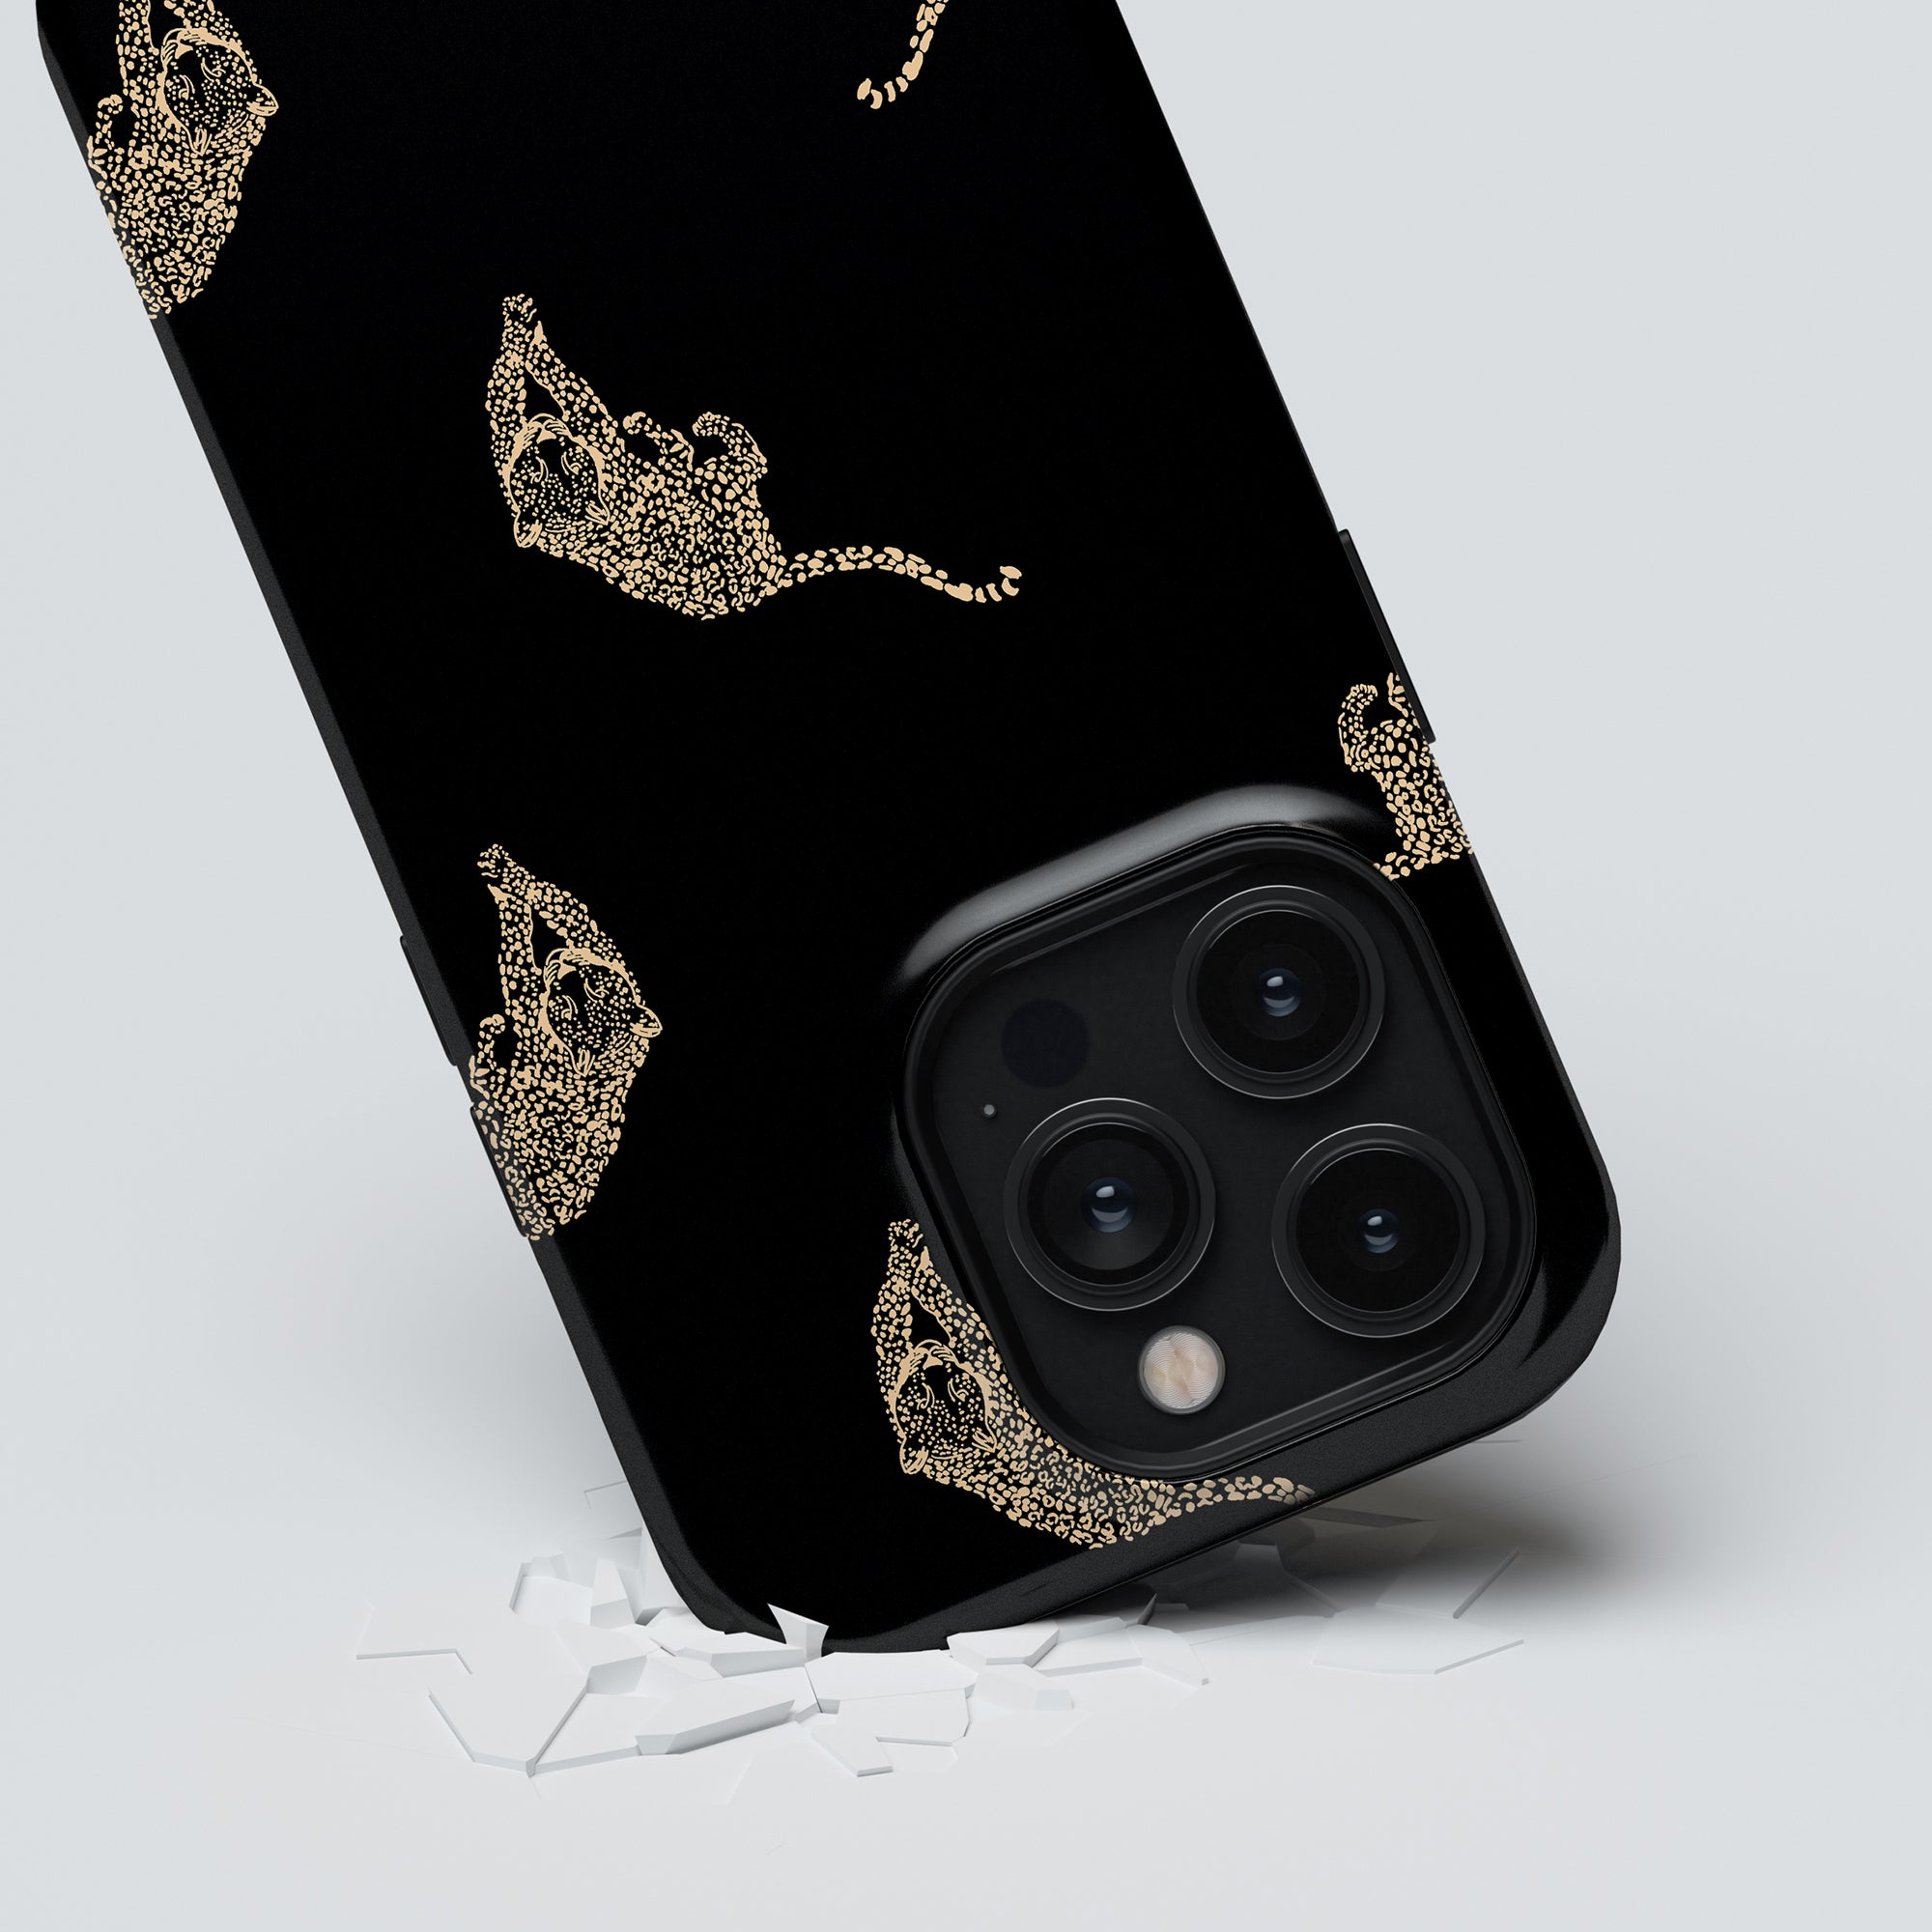 A Kitty Black - Tough Case with a cat design on it.